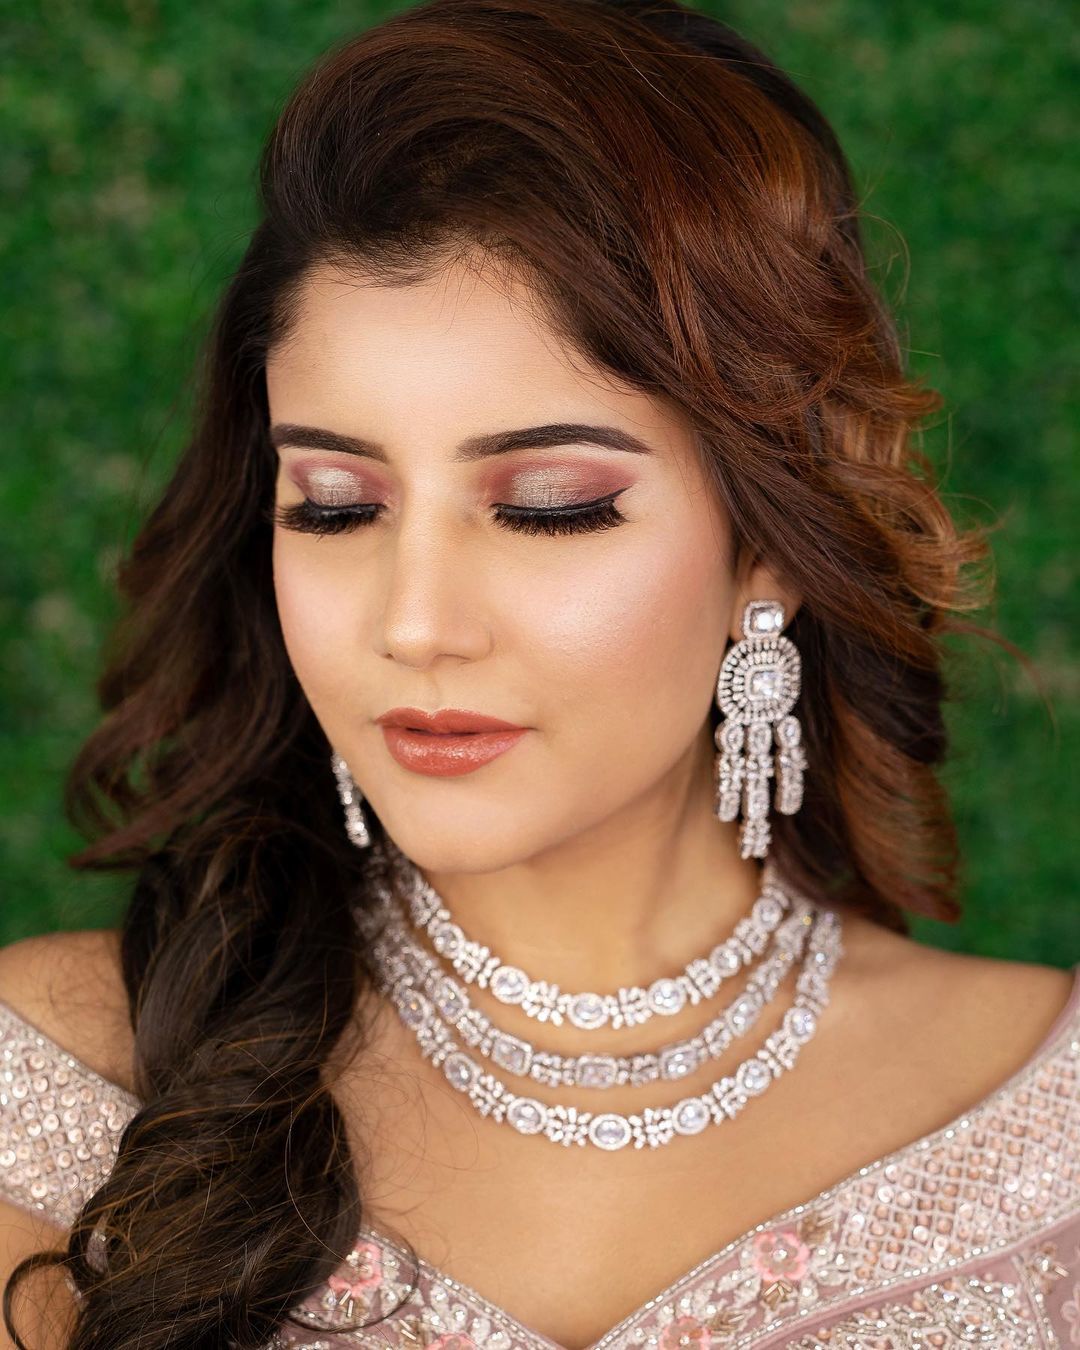 South Indian Bridal Makeup & Hairstyles Images - Wedlockindia.com